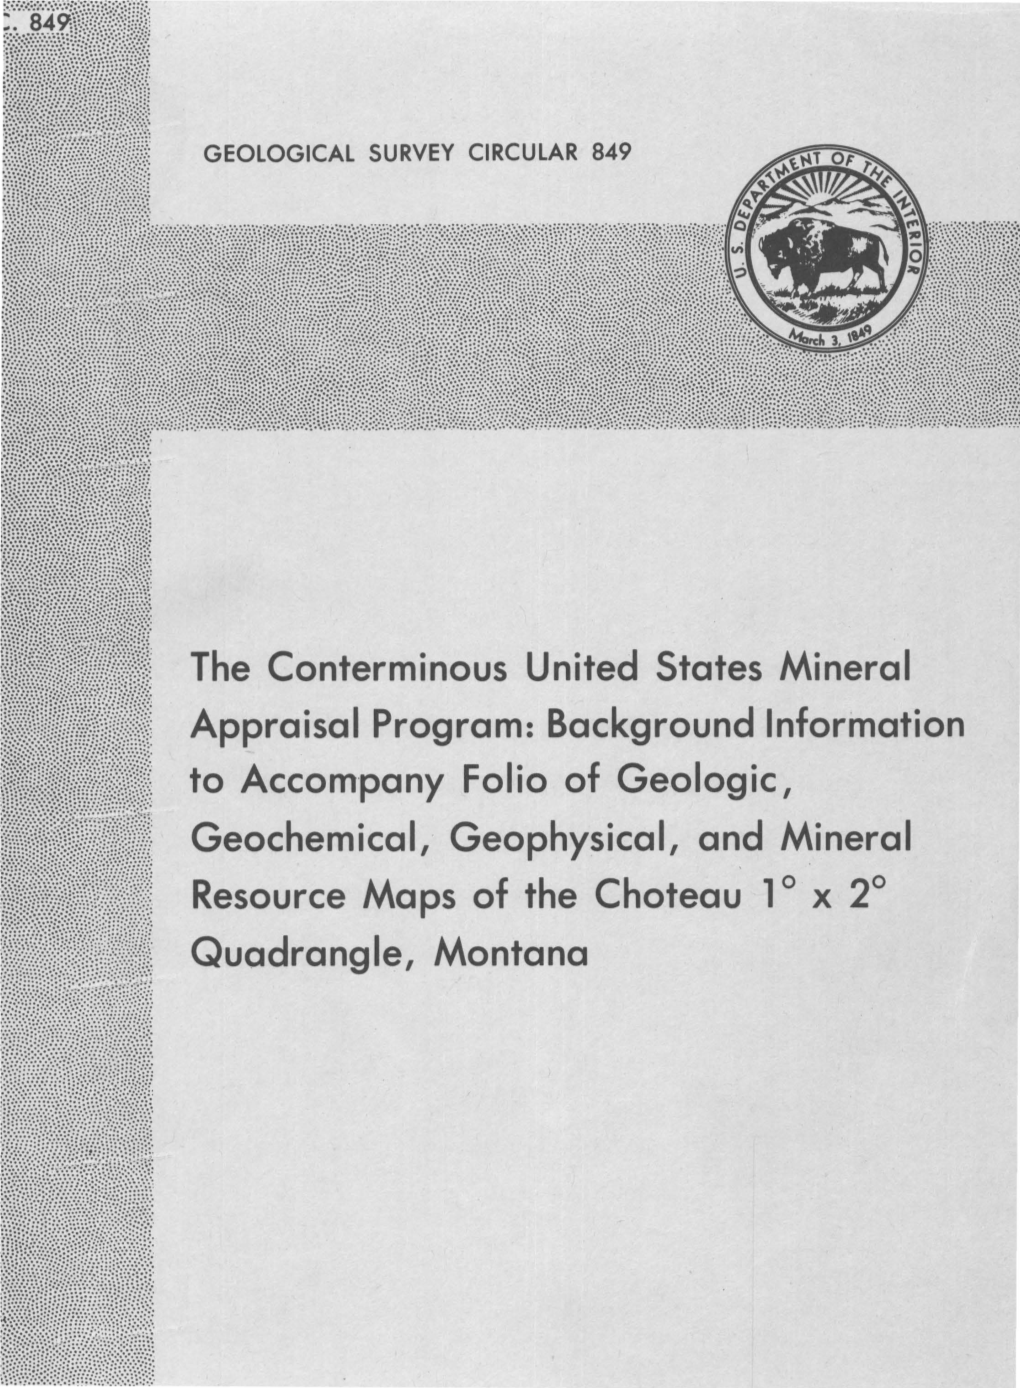 The Conterminous United States Mineral Appraisal Program